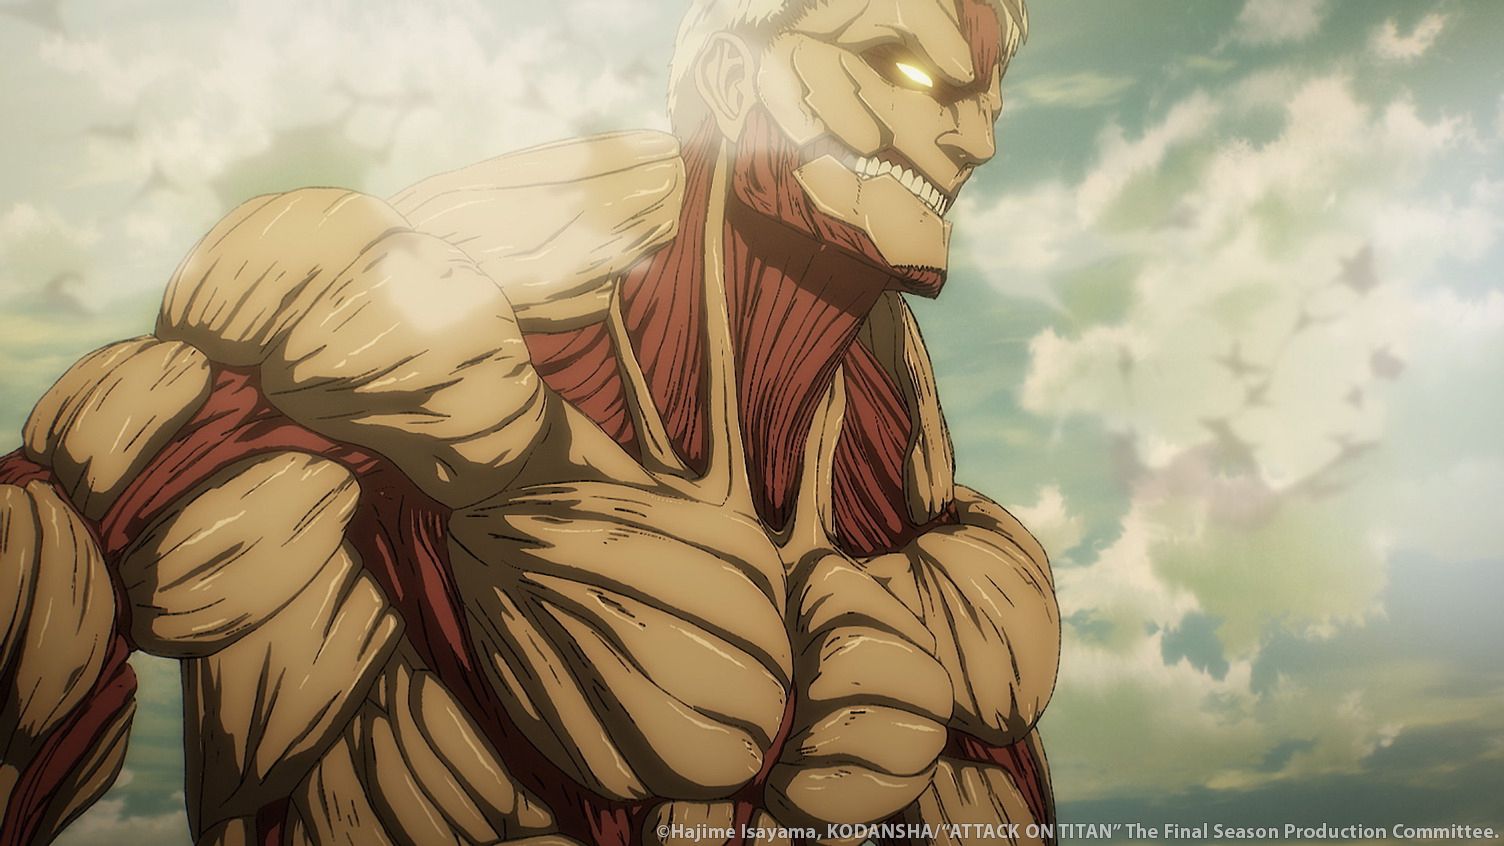 Attack on Titan Final Season Part 3 Documentary to Go Behind the